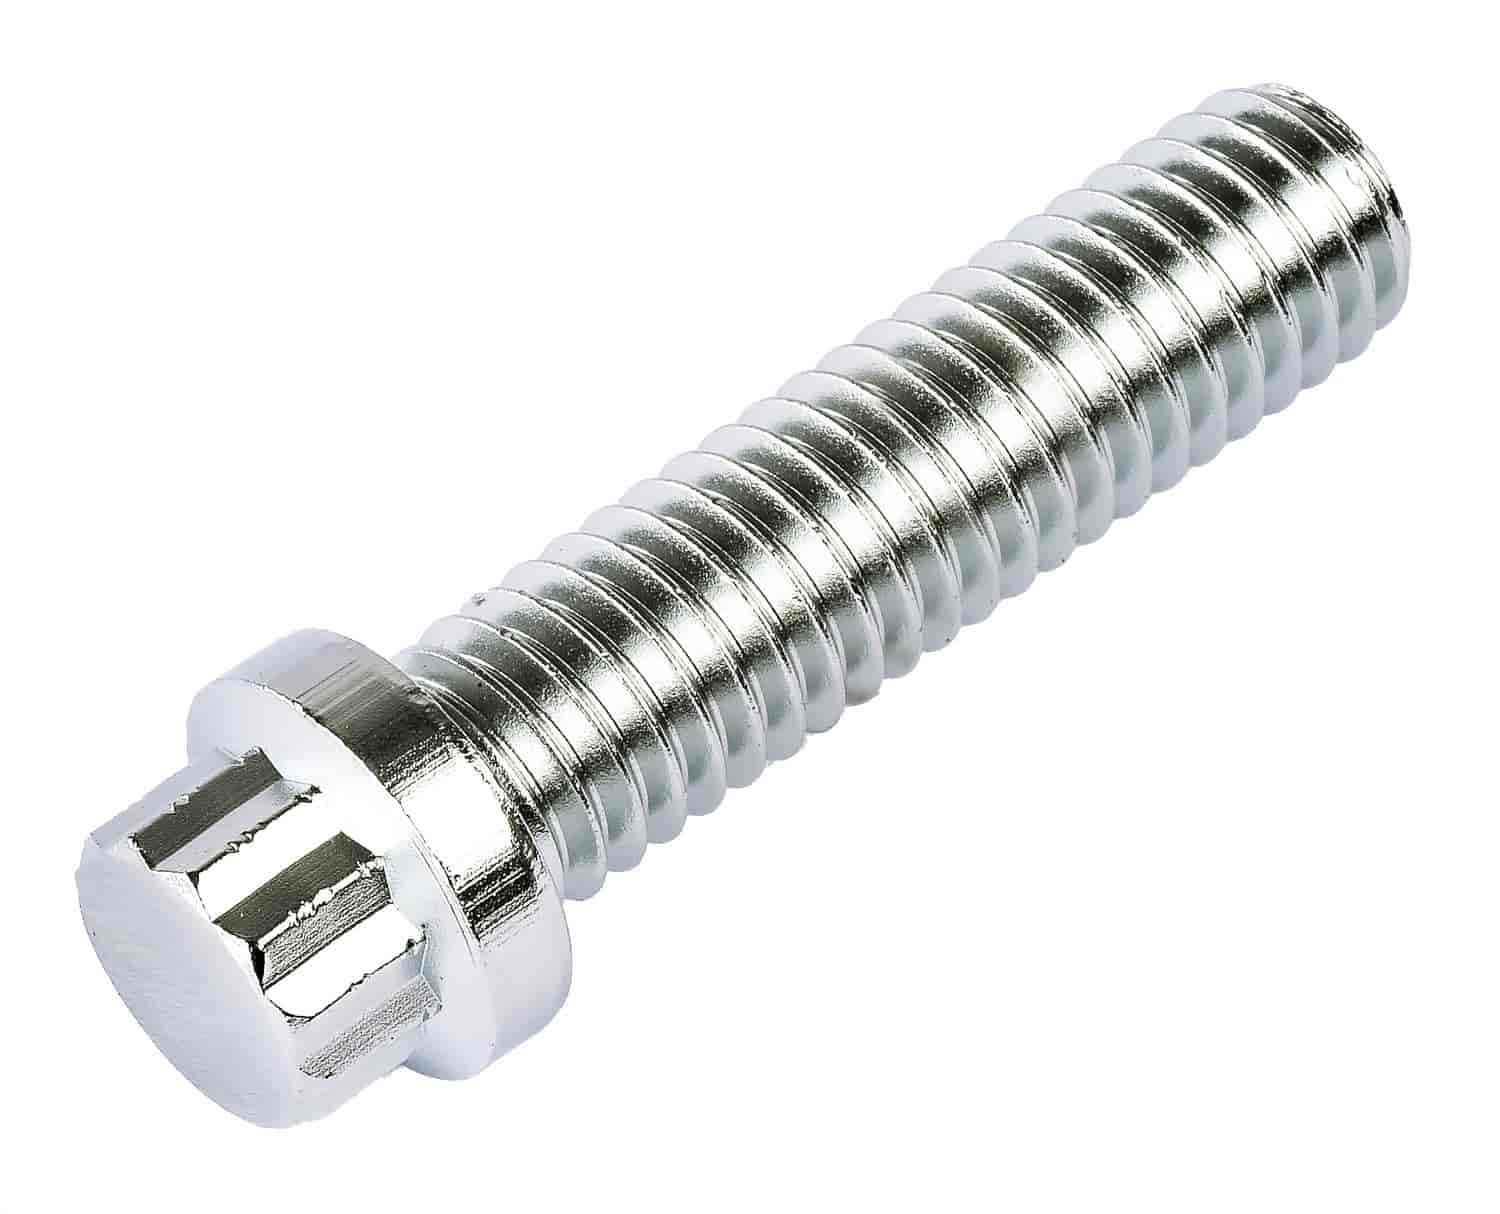 12-Point Fastener [3/8 in. -16 Thread x 1 1/2 (.500) in. Length]